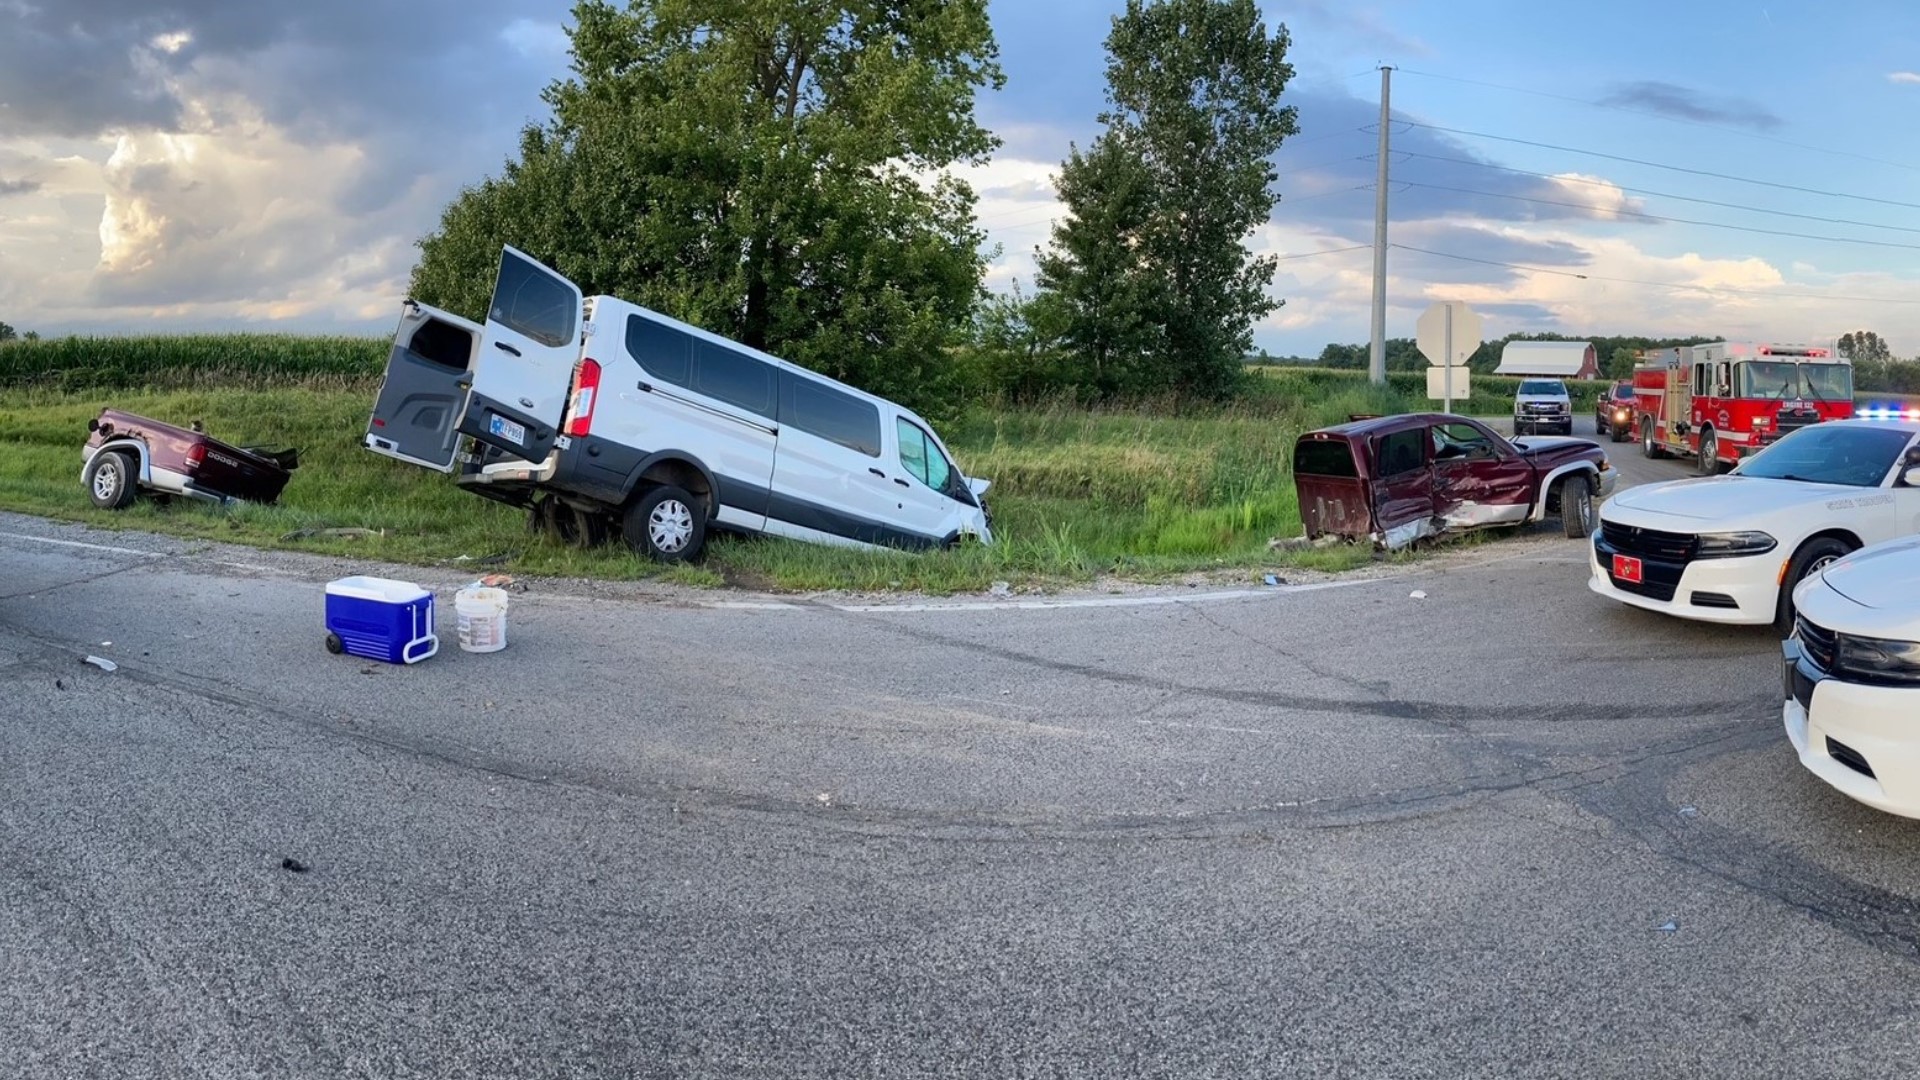 The crash happened Monday around 7:15 p.m. on US 27 and Hoagland Road south of Fort Wayne.